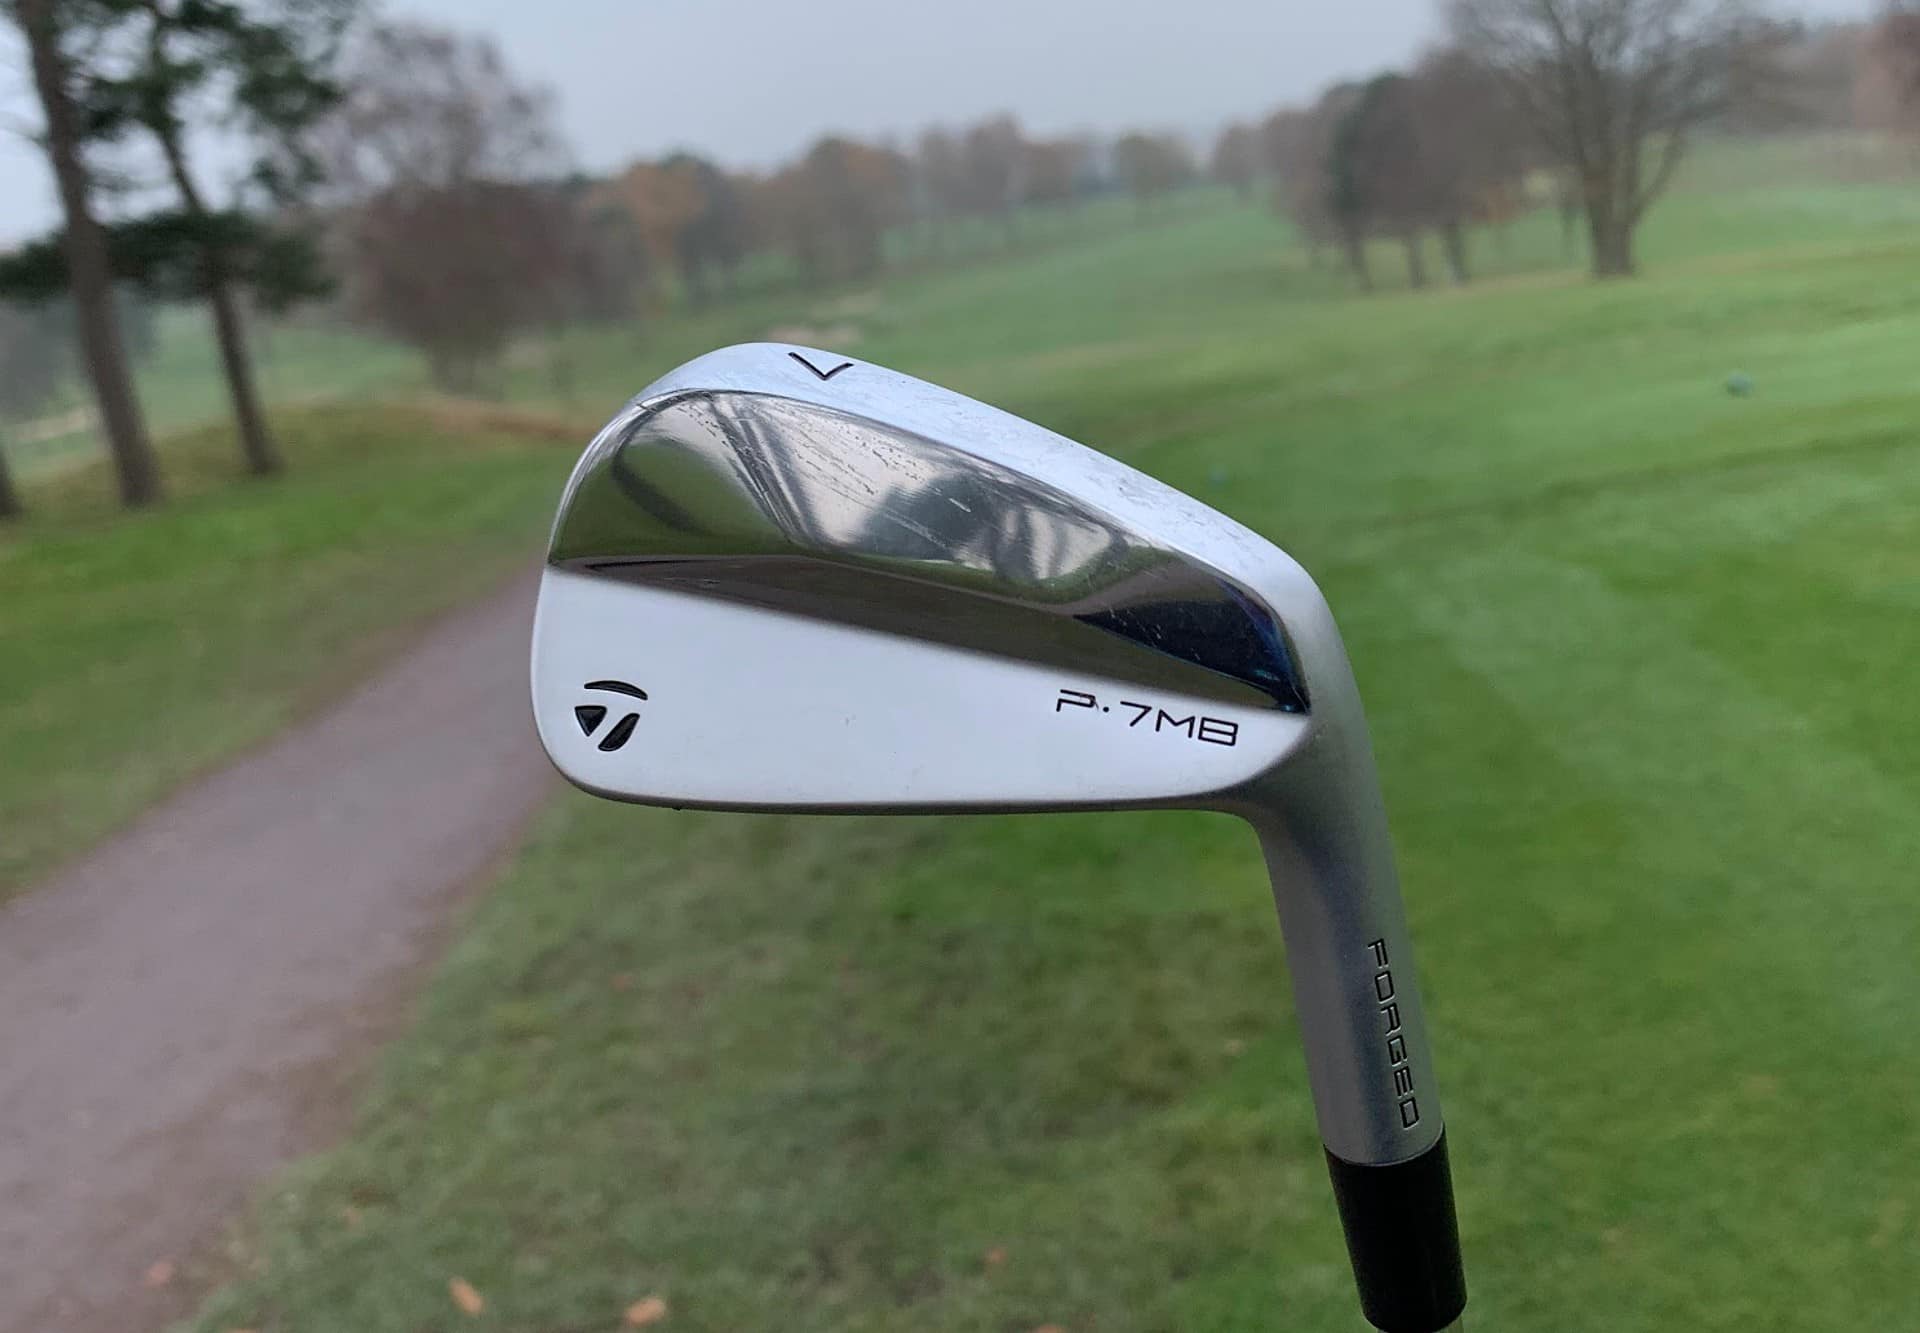 taylormade p7mb specs